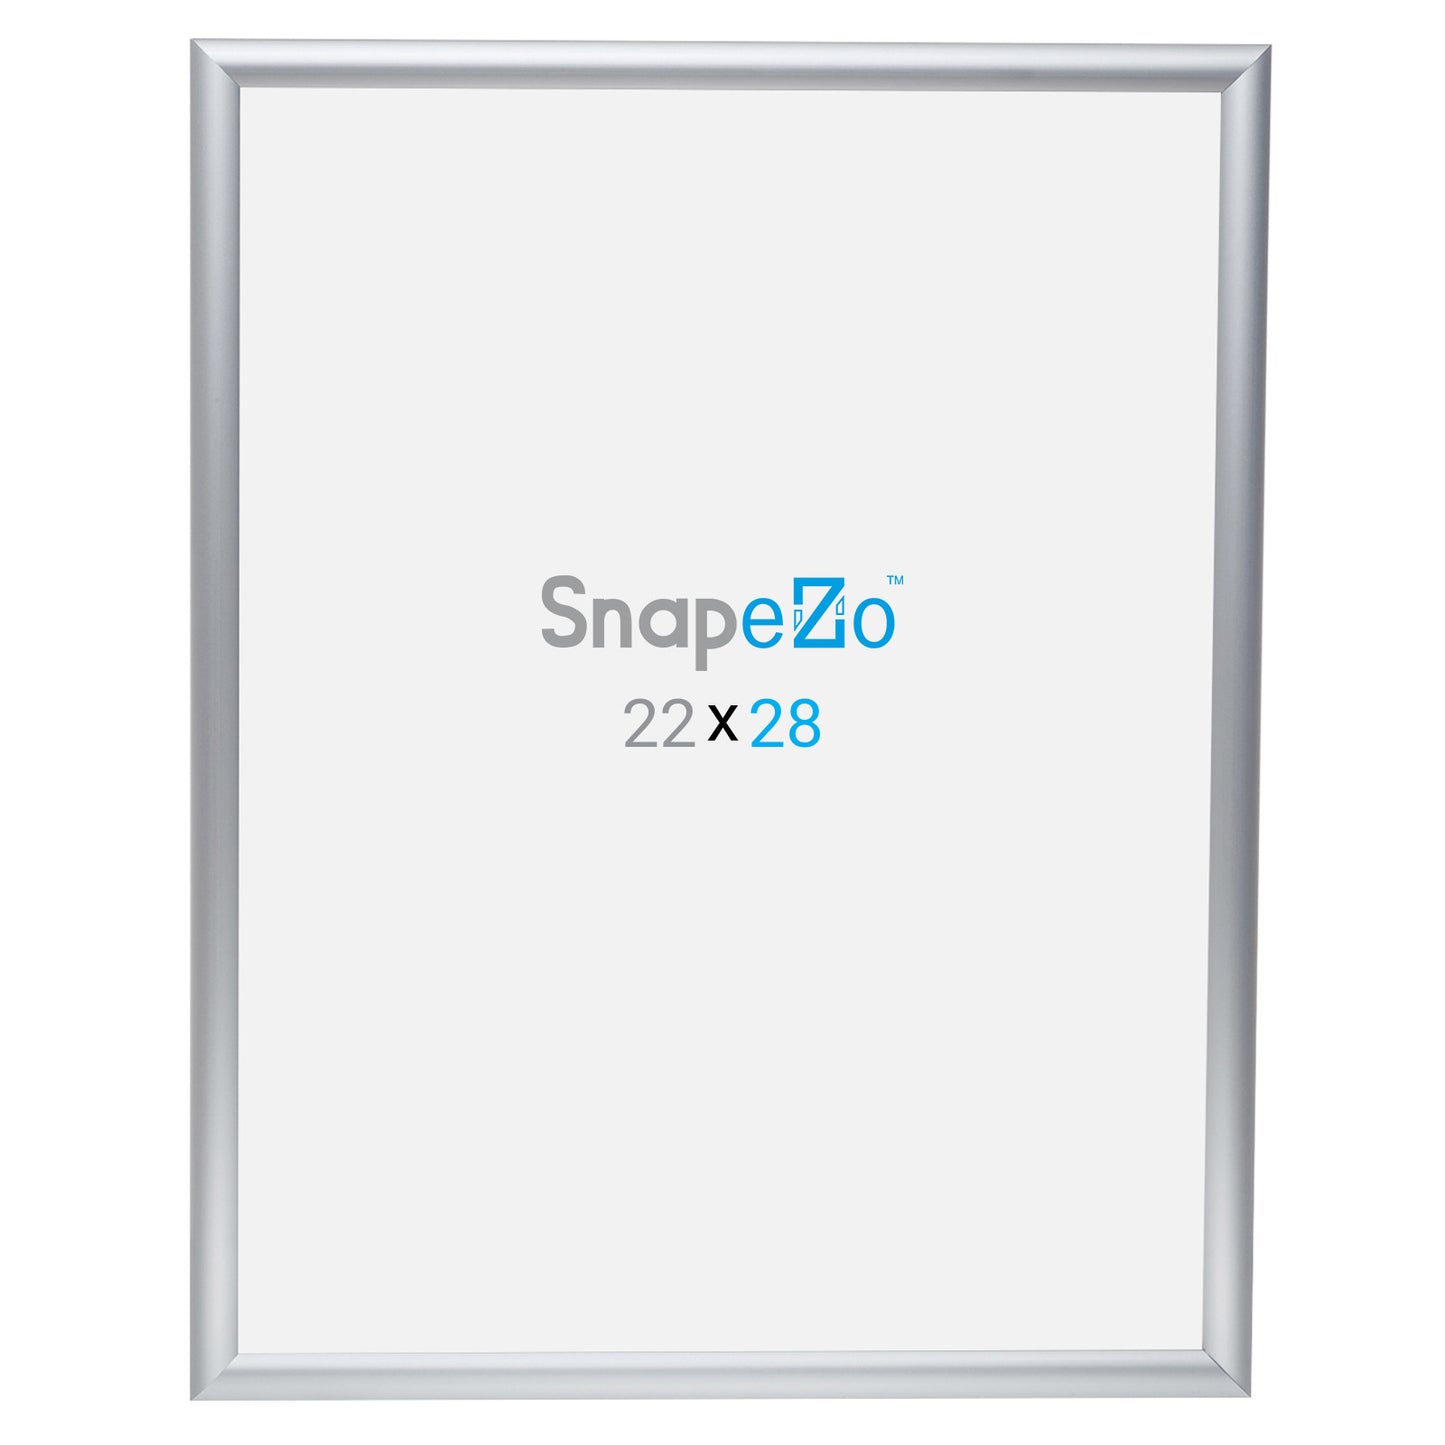 Twin-Pack of Snapezo® Silver 22x28 Poster Frame - 1" Profile